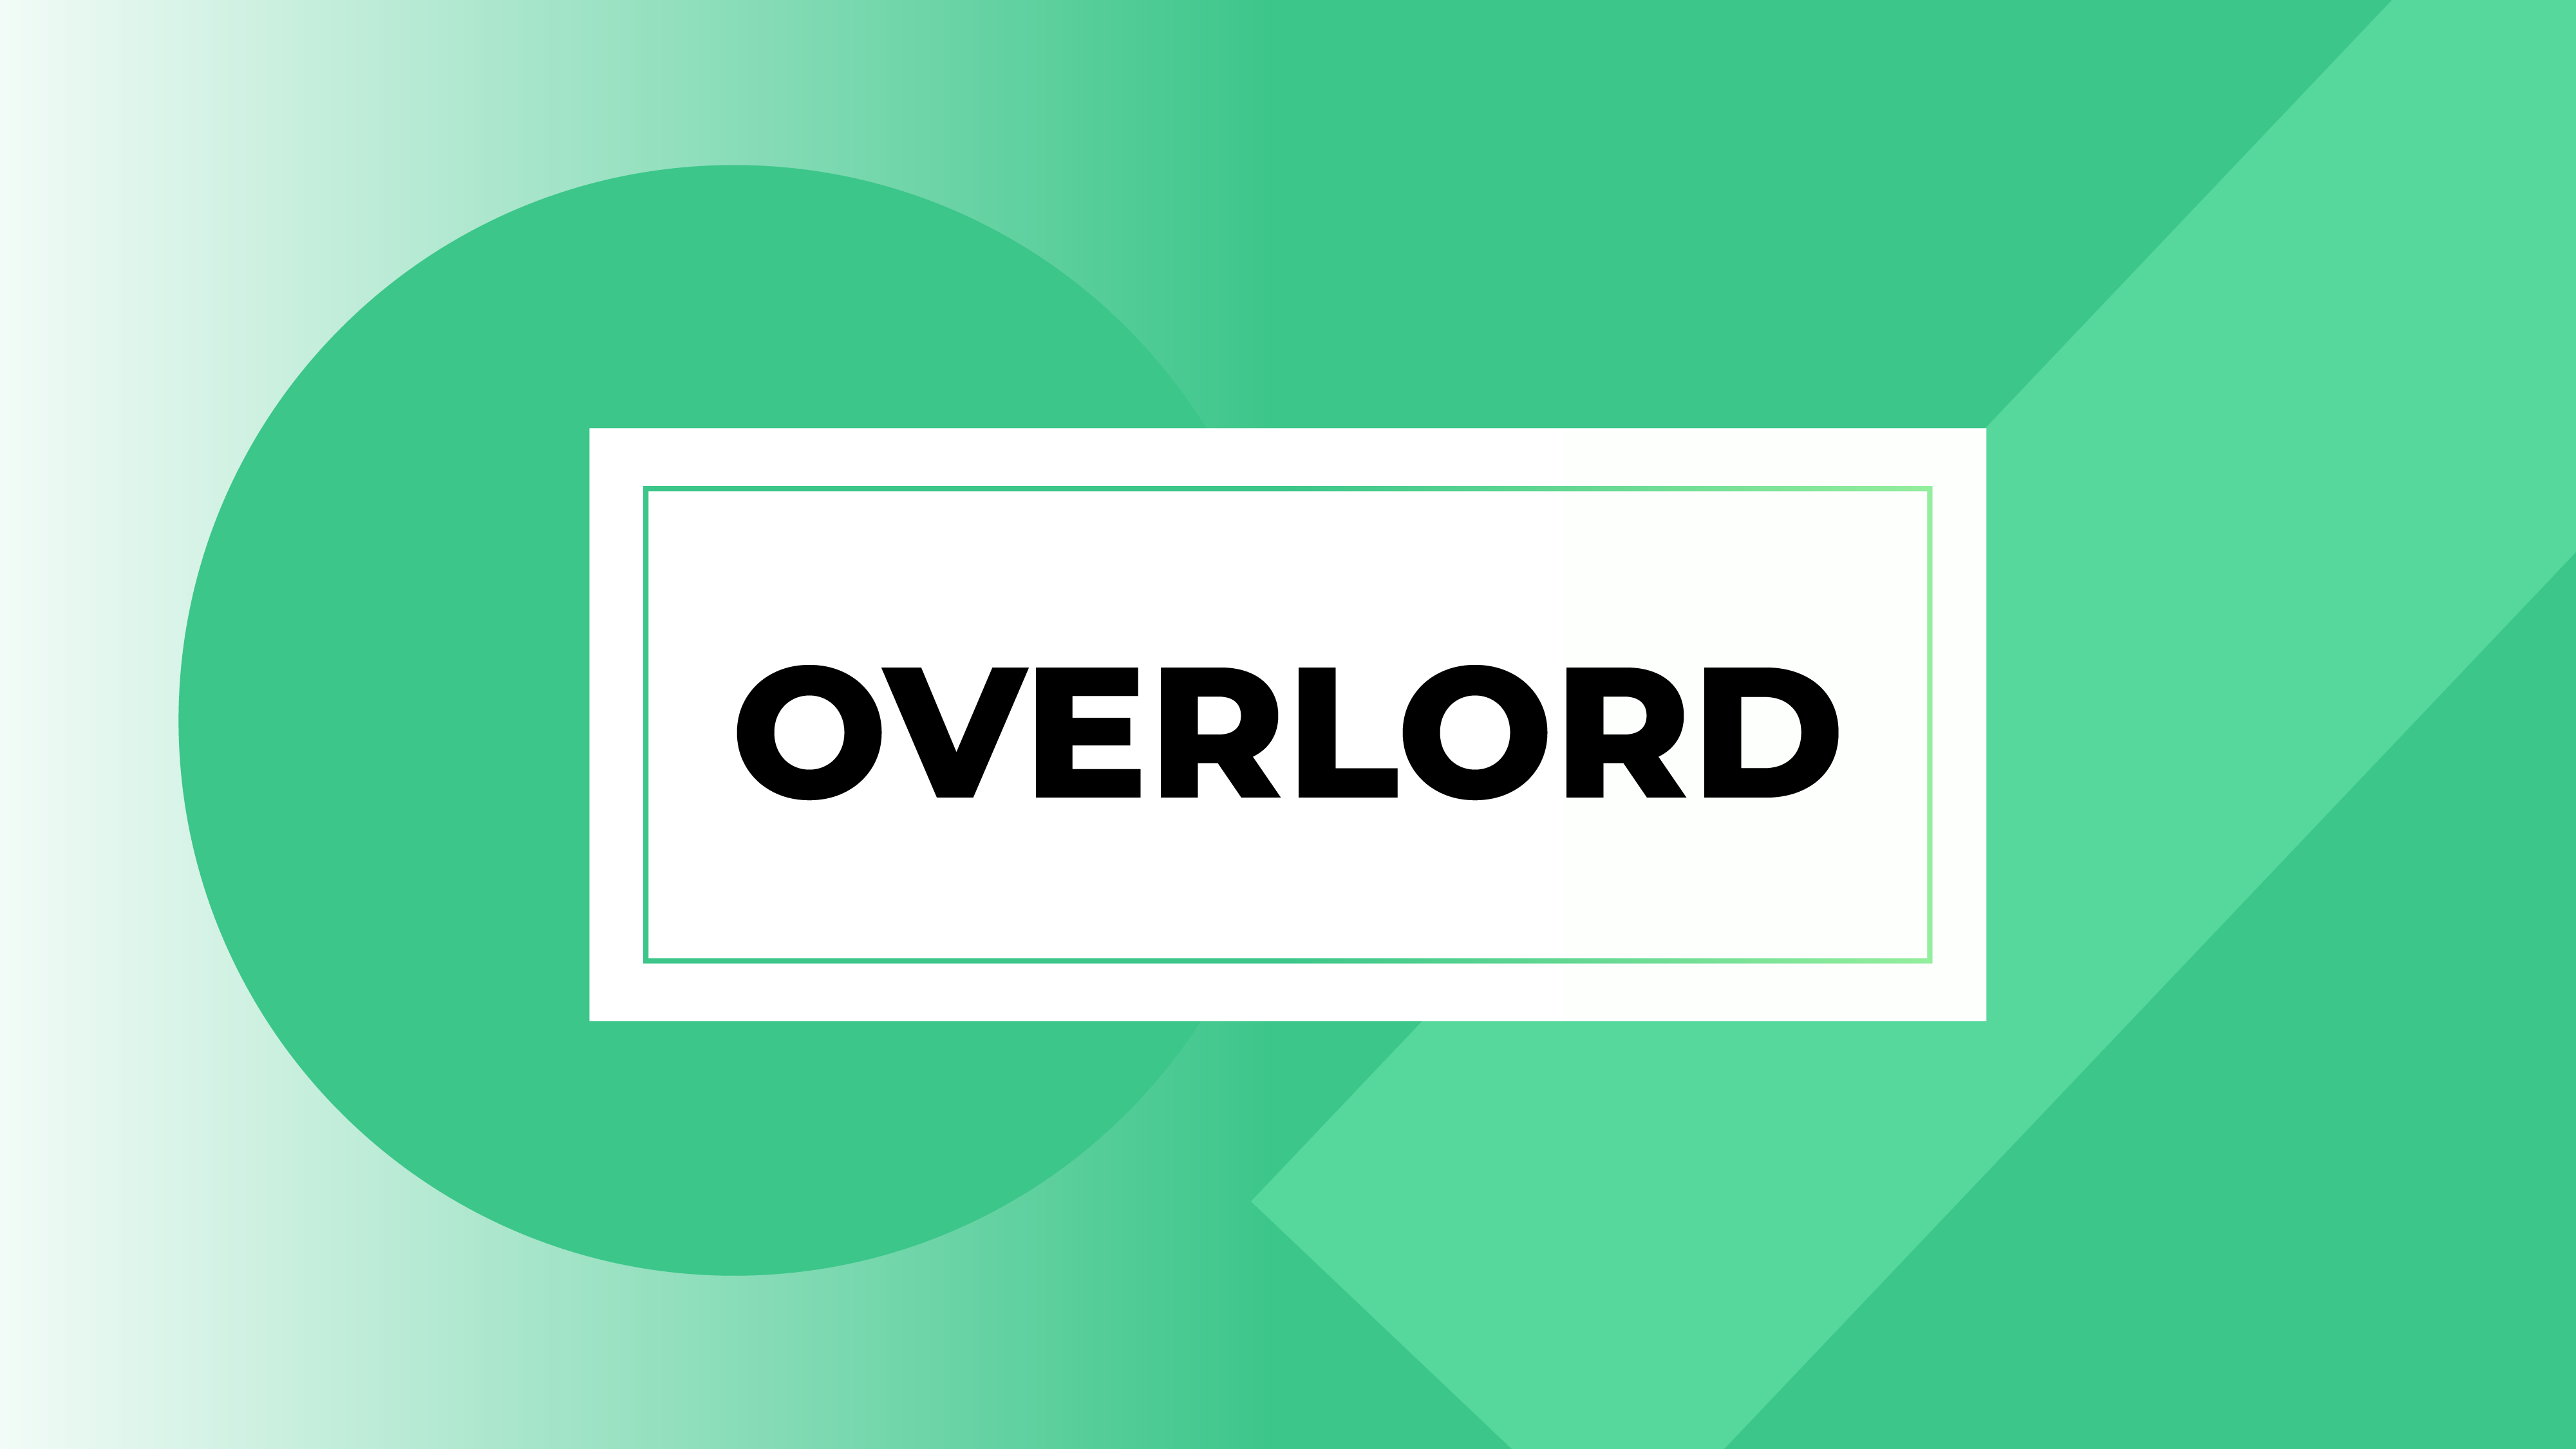 Overlord — A new consensus algorithm | by Nervos Network ...